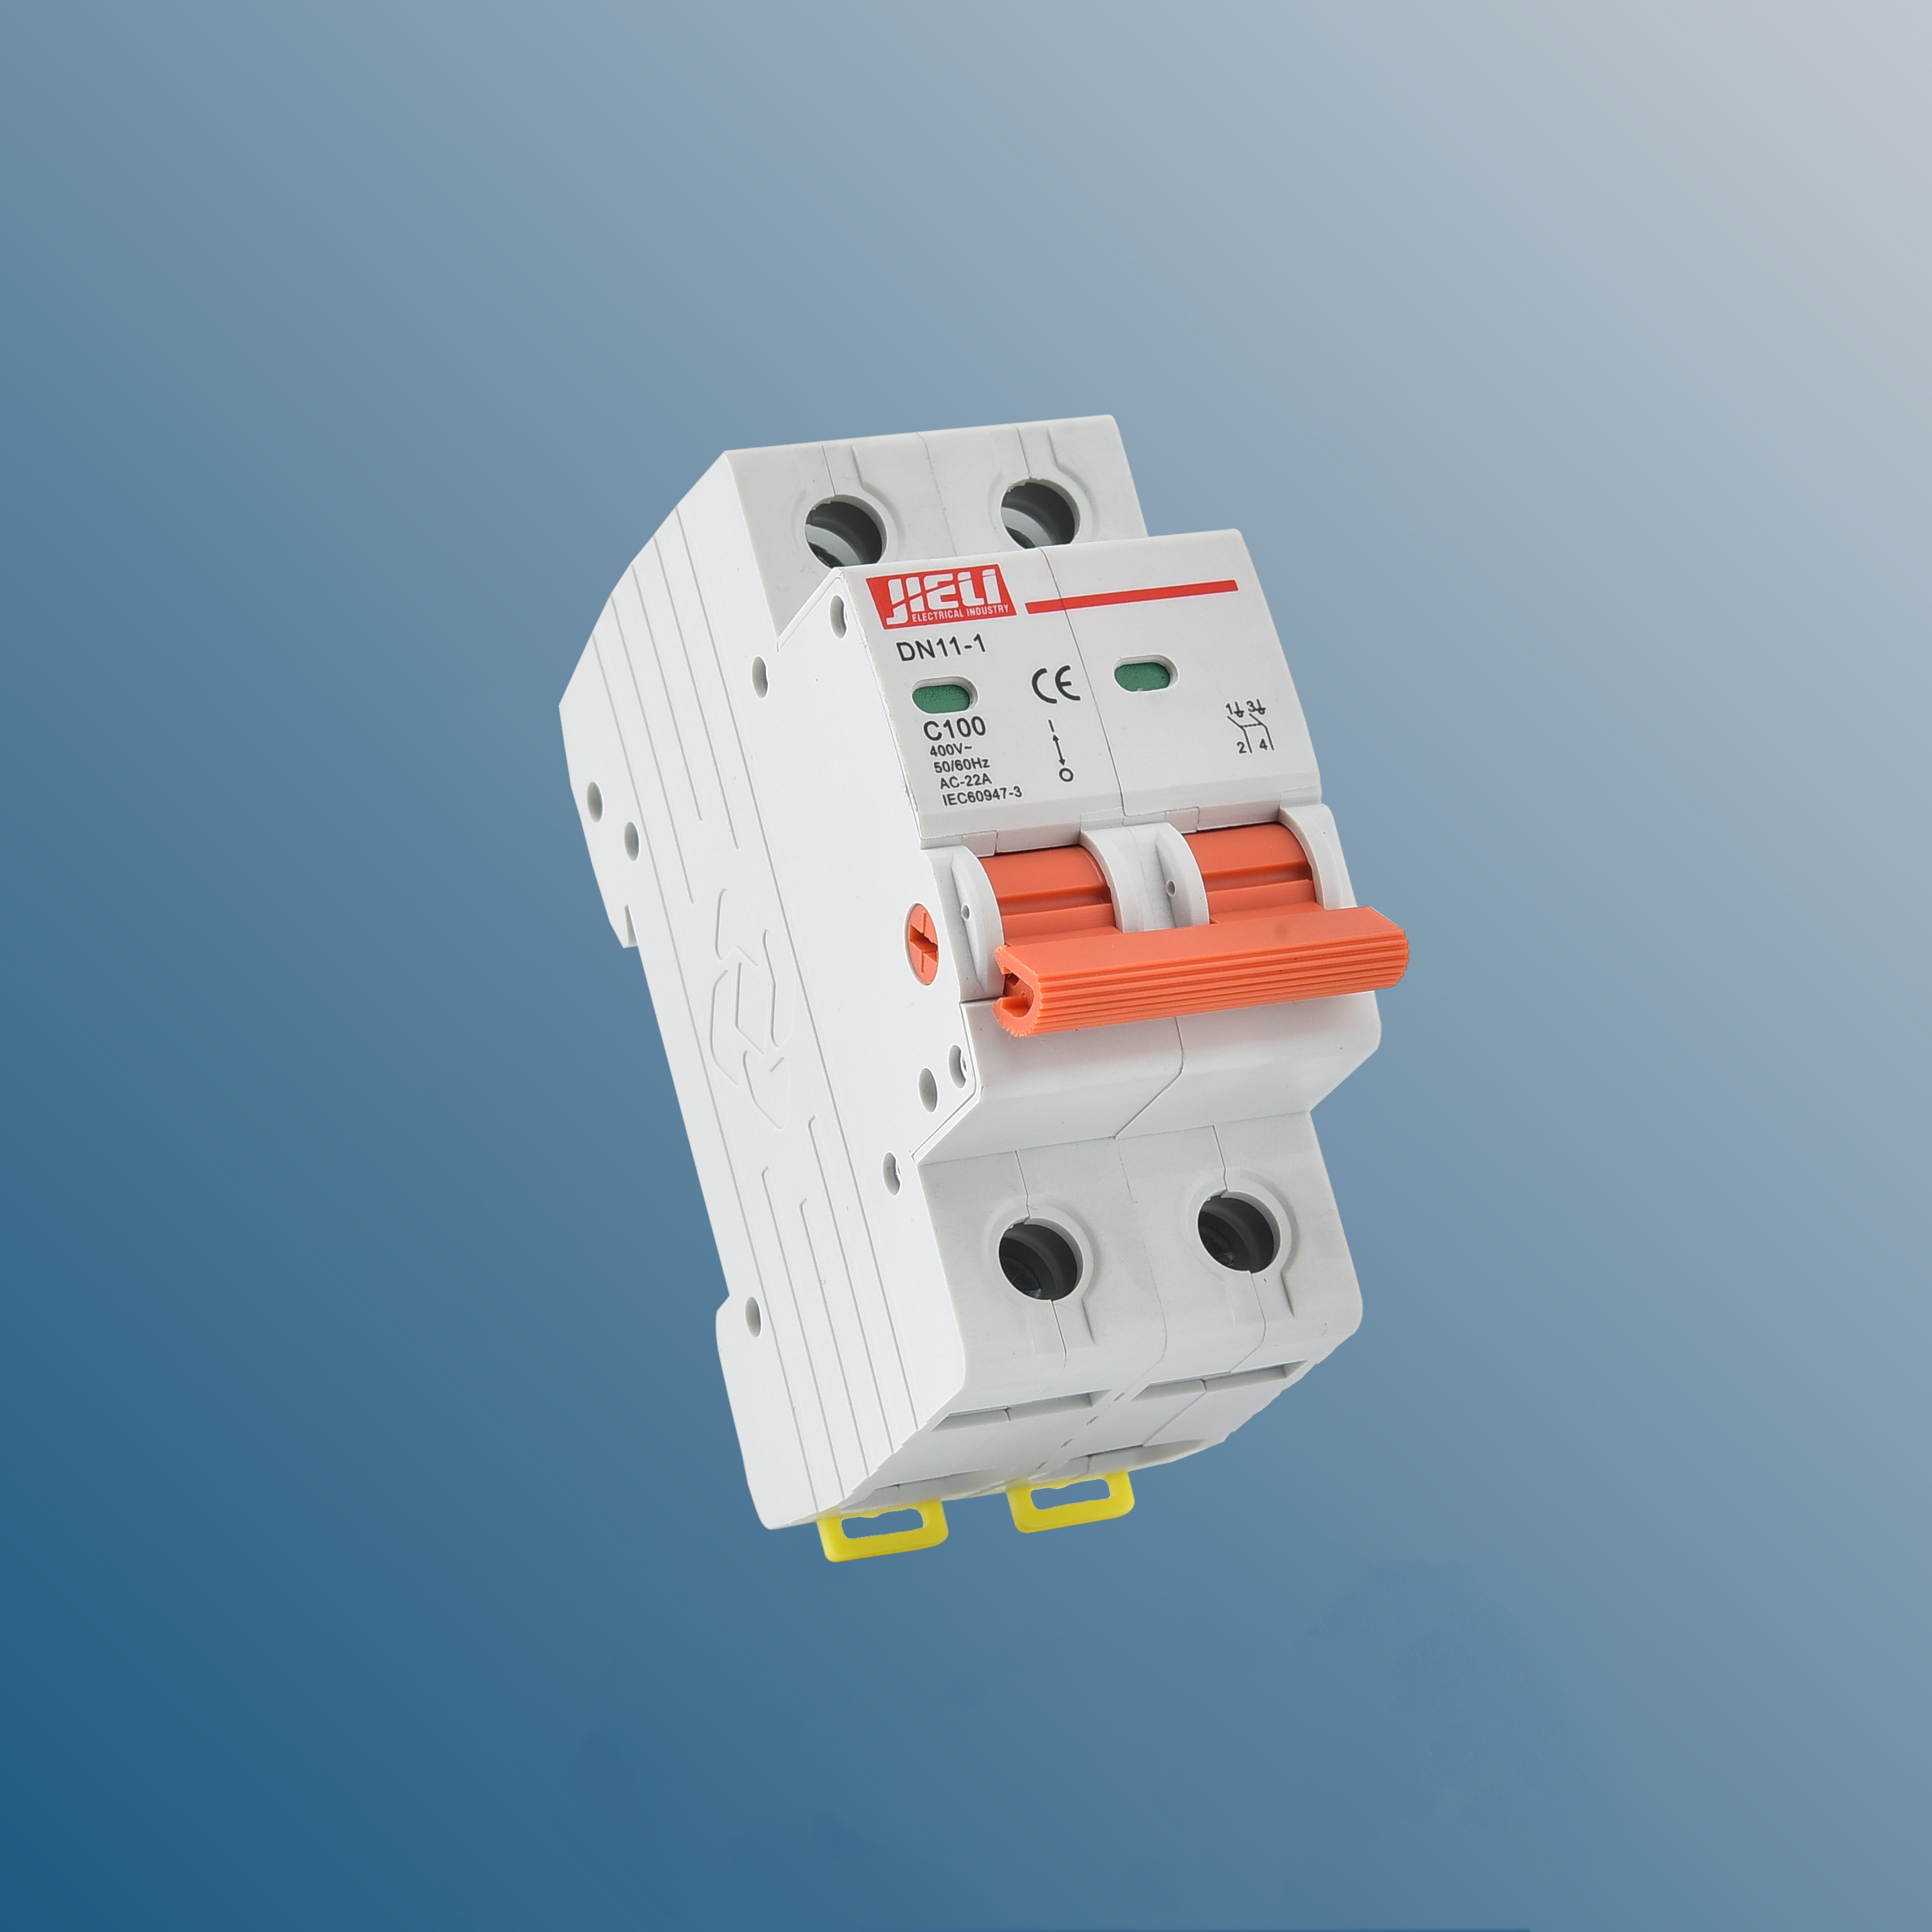 What is the function of low voltage circuit breaker skd?